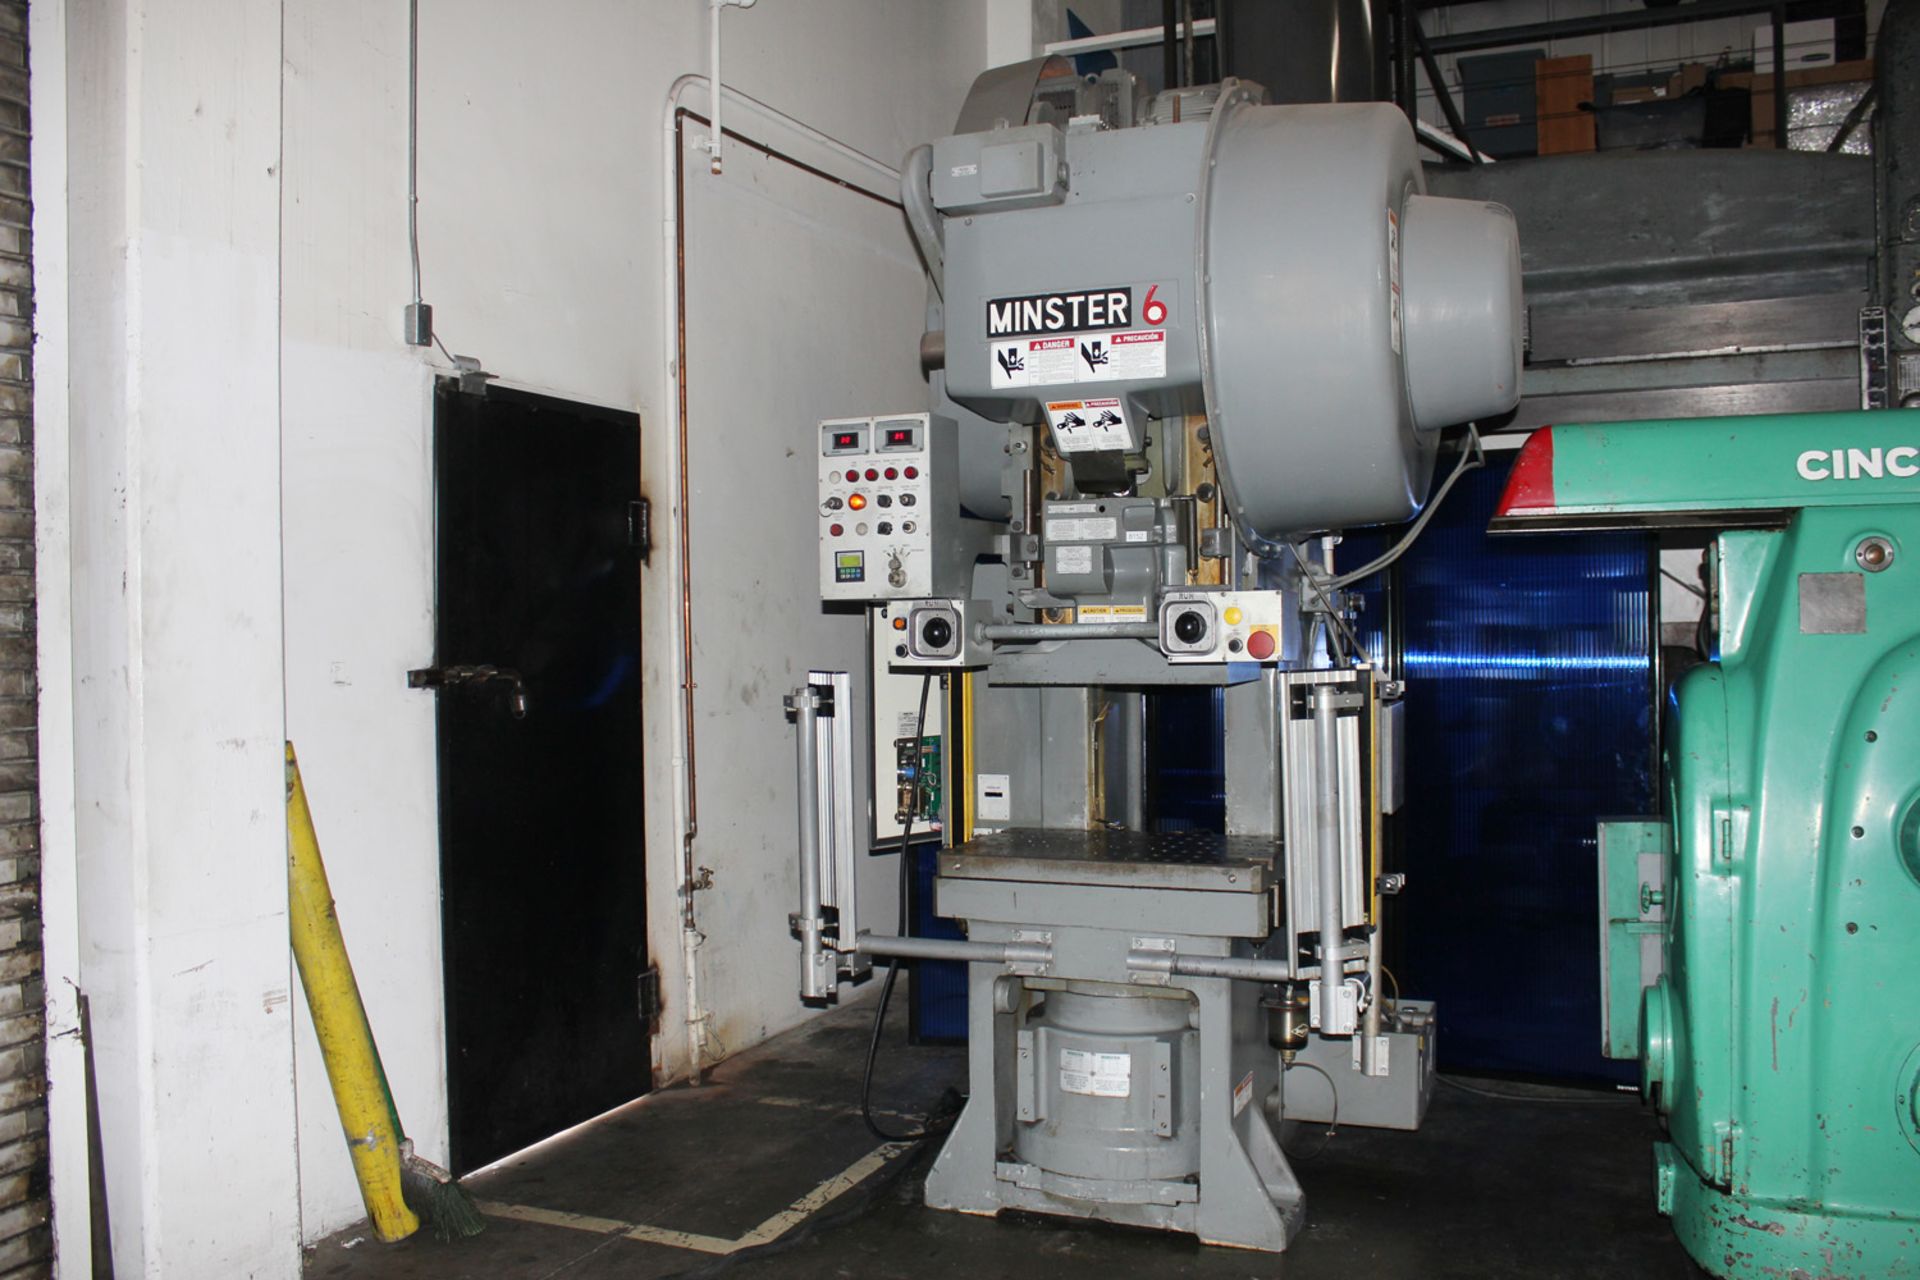 2002 Minster 6SS OBS Variable Speed Punch Press | 60 Ton, Mdl: 6SS, S/N: 30142 - 8152HP